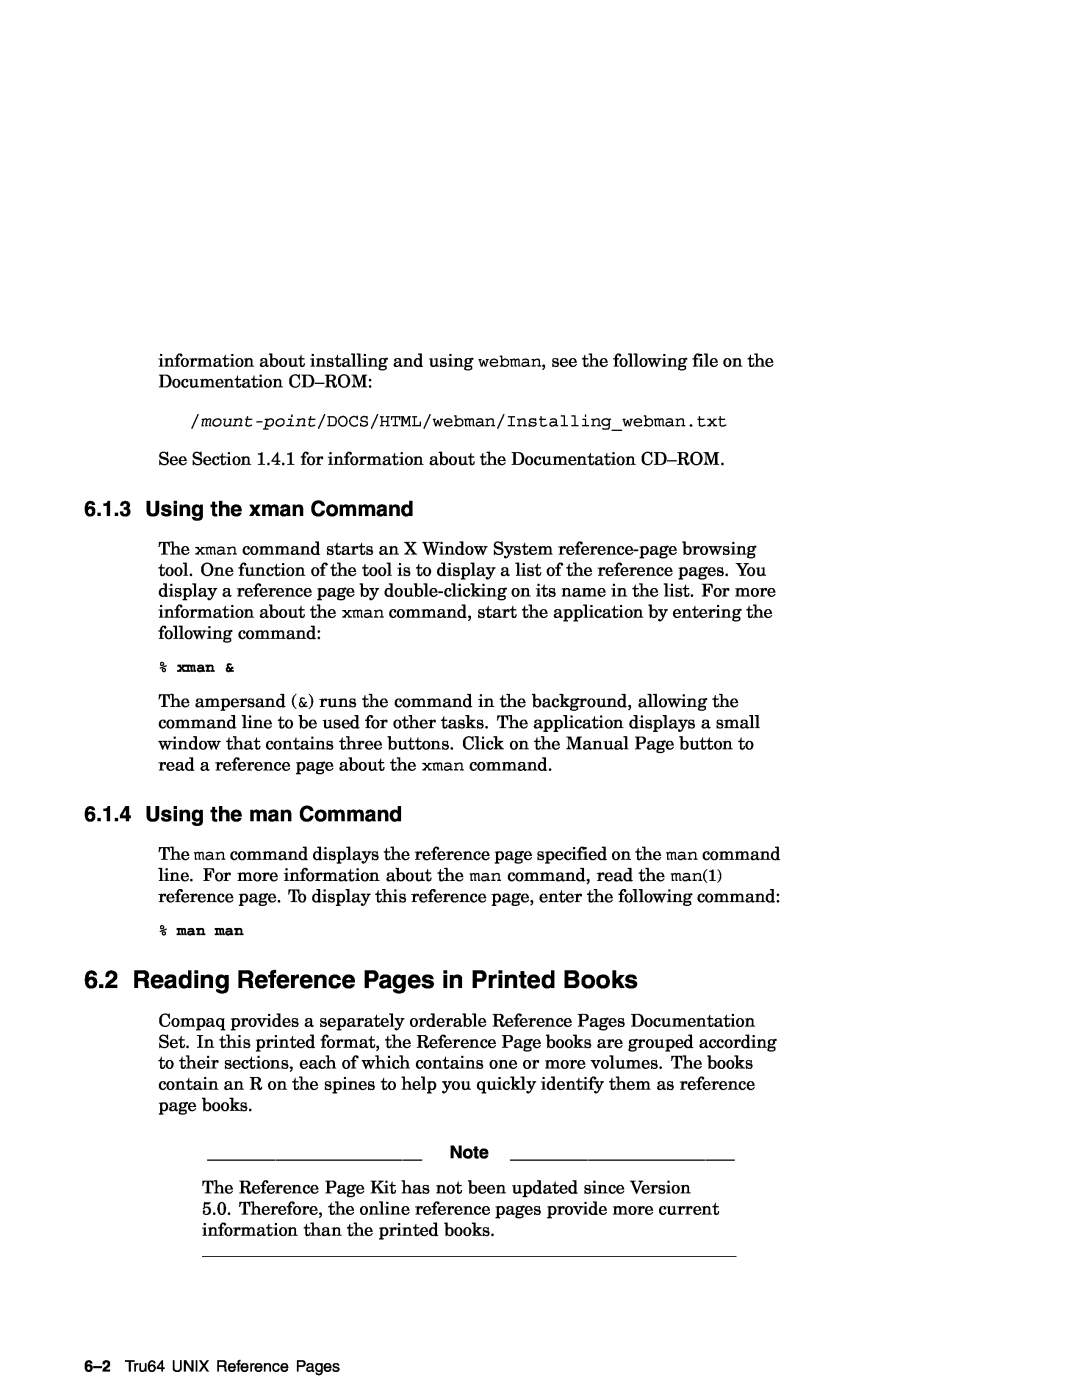 Compaq AA-RH8RD-TE manual Reading Reference Pages in Printed Books, Using the xman Command, Using the man Command 